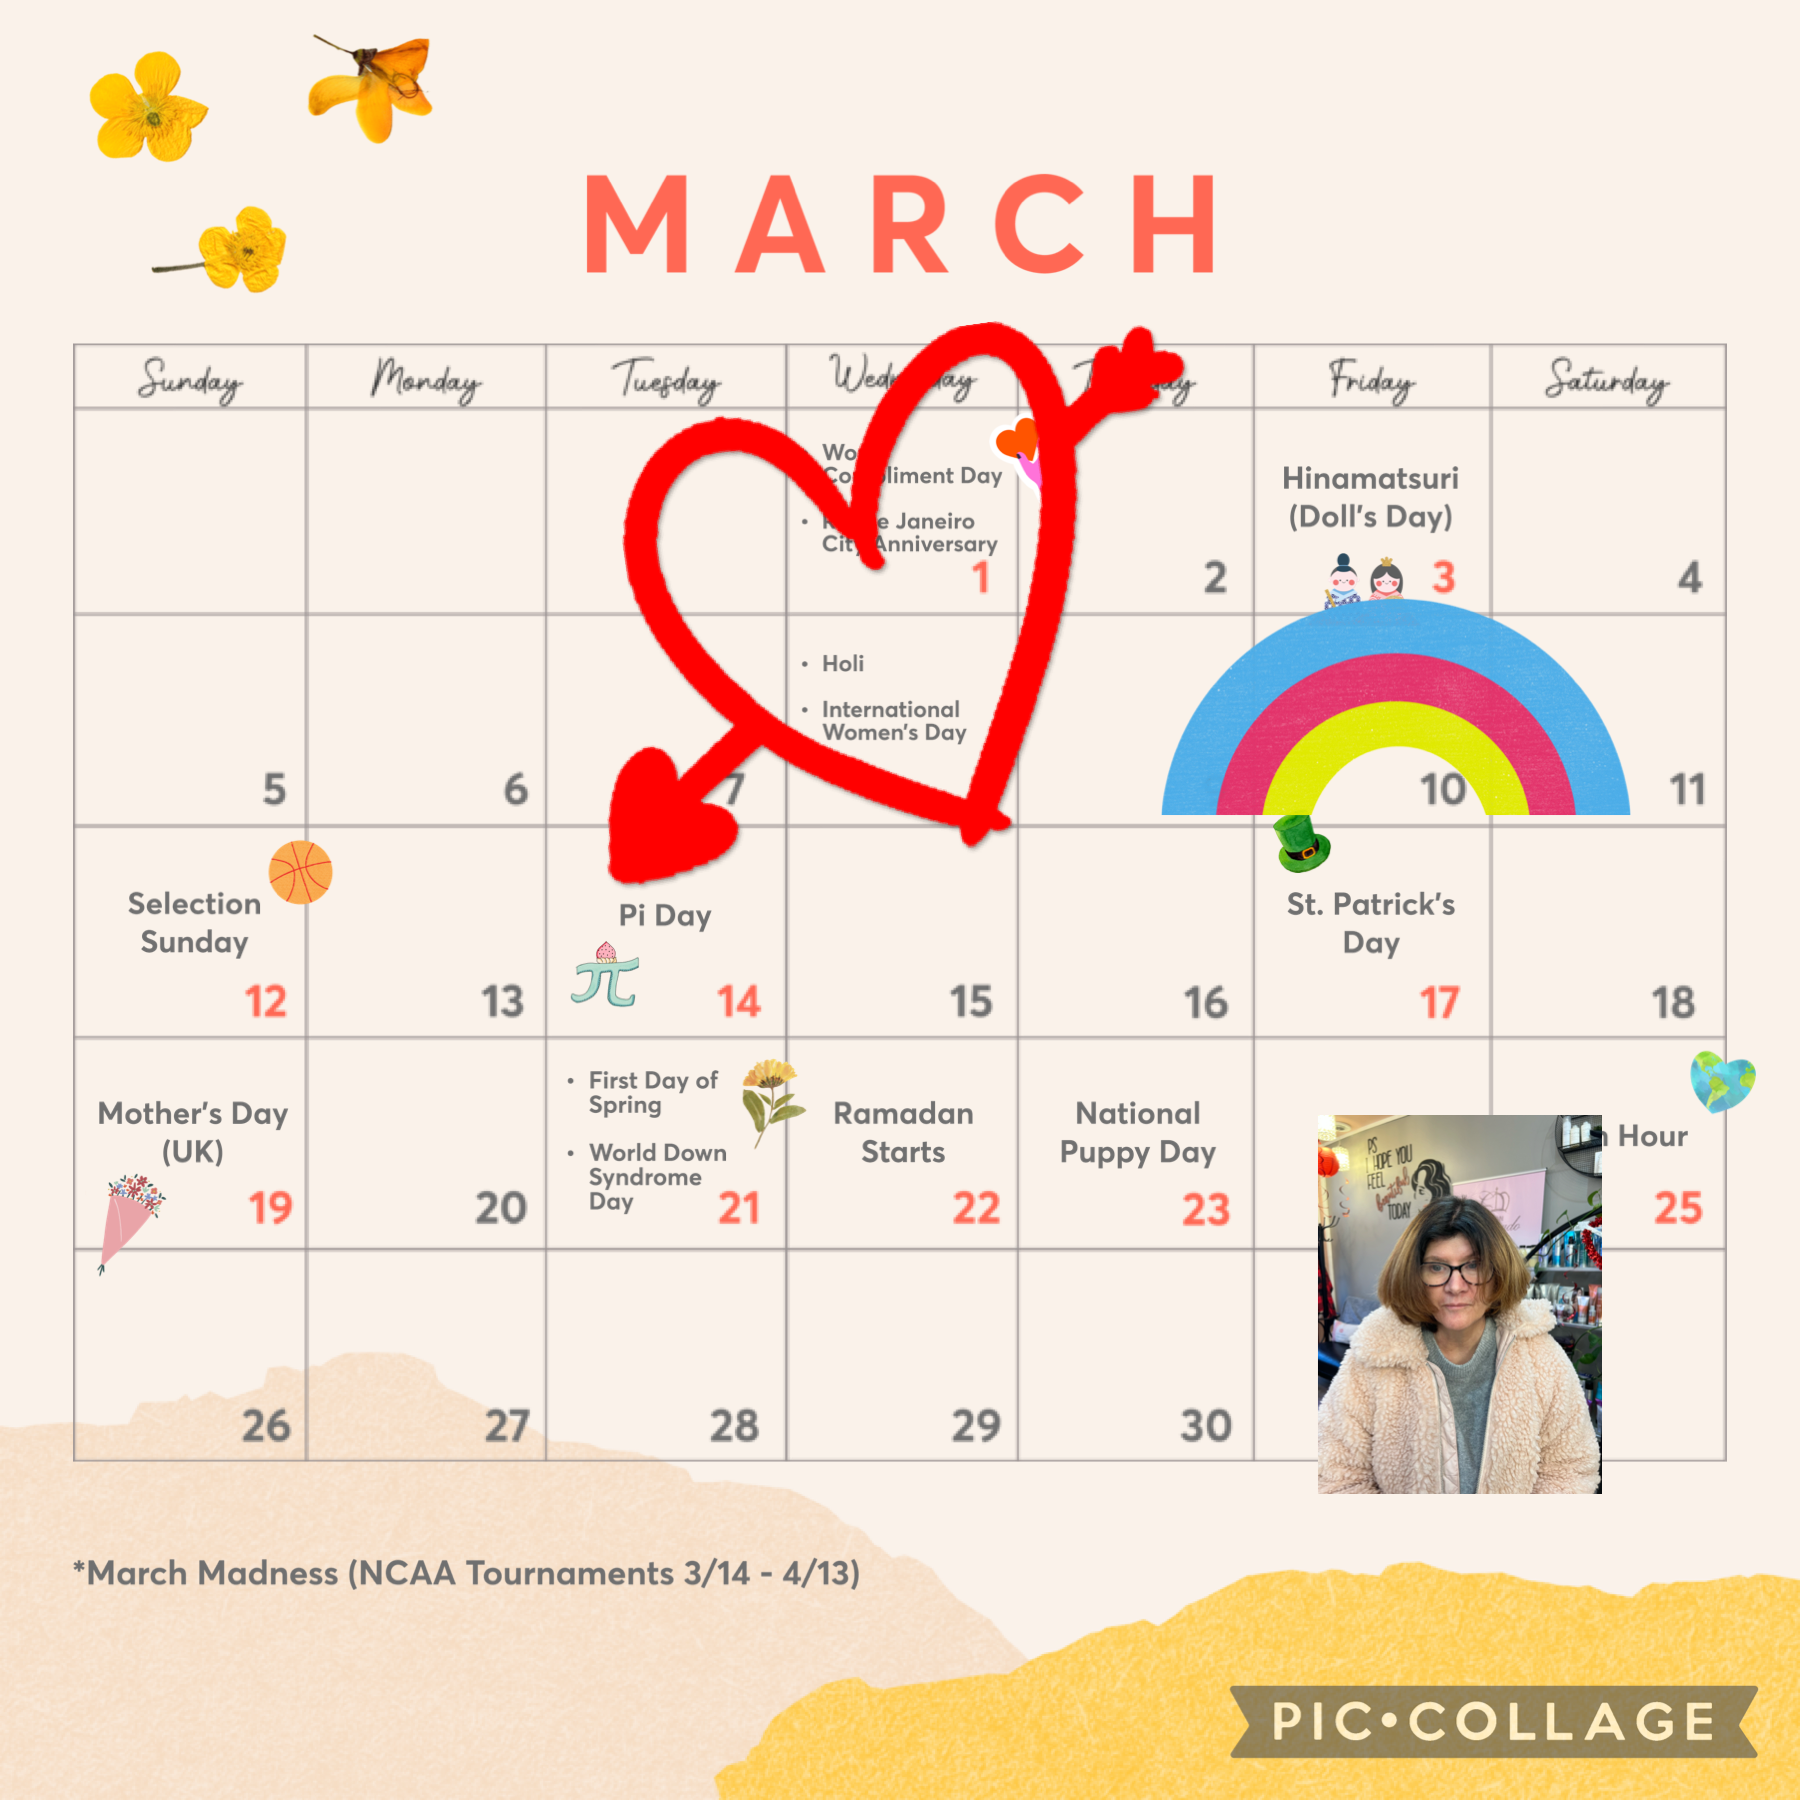 #march